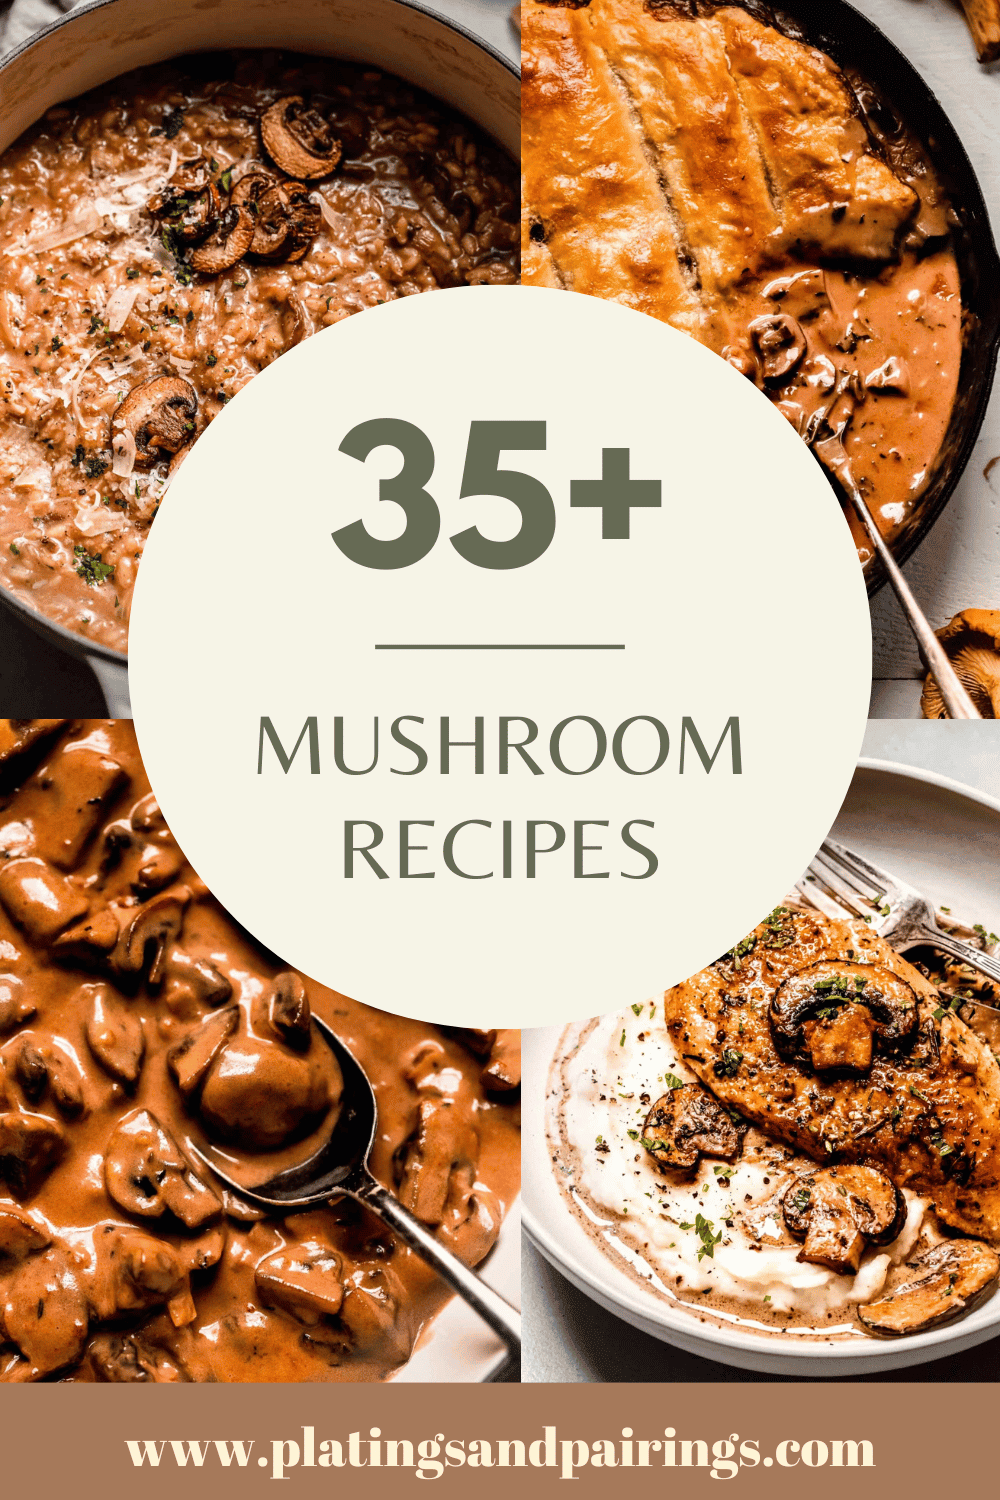 Collage of mushroom recipes with text overlay.